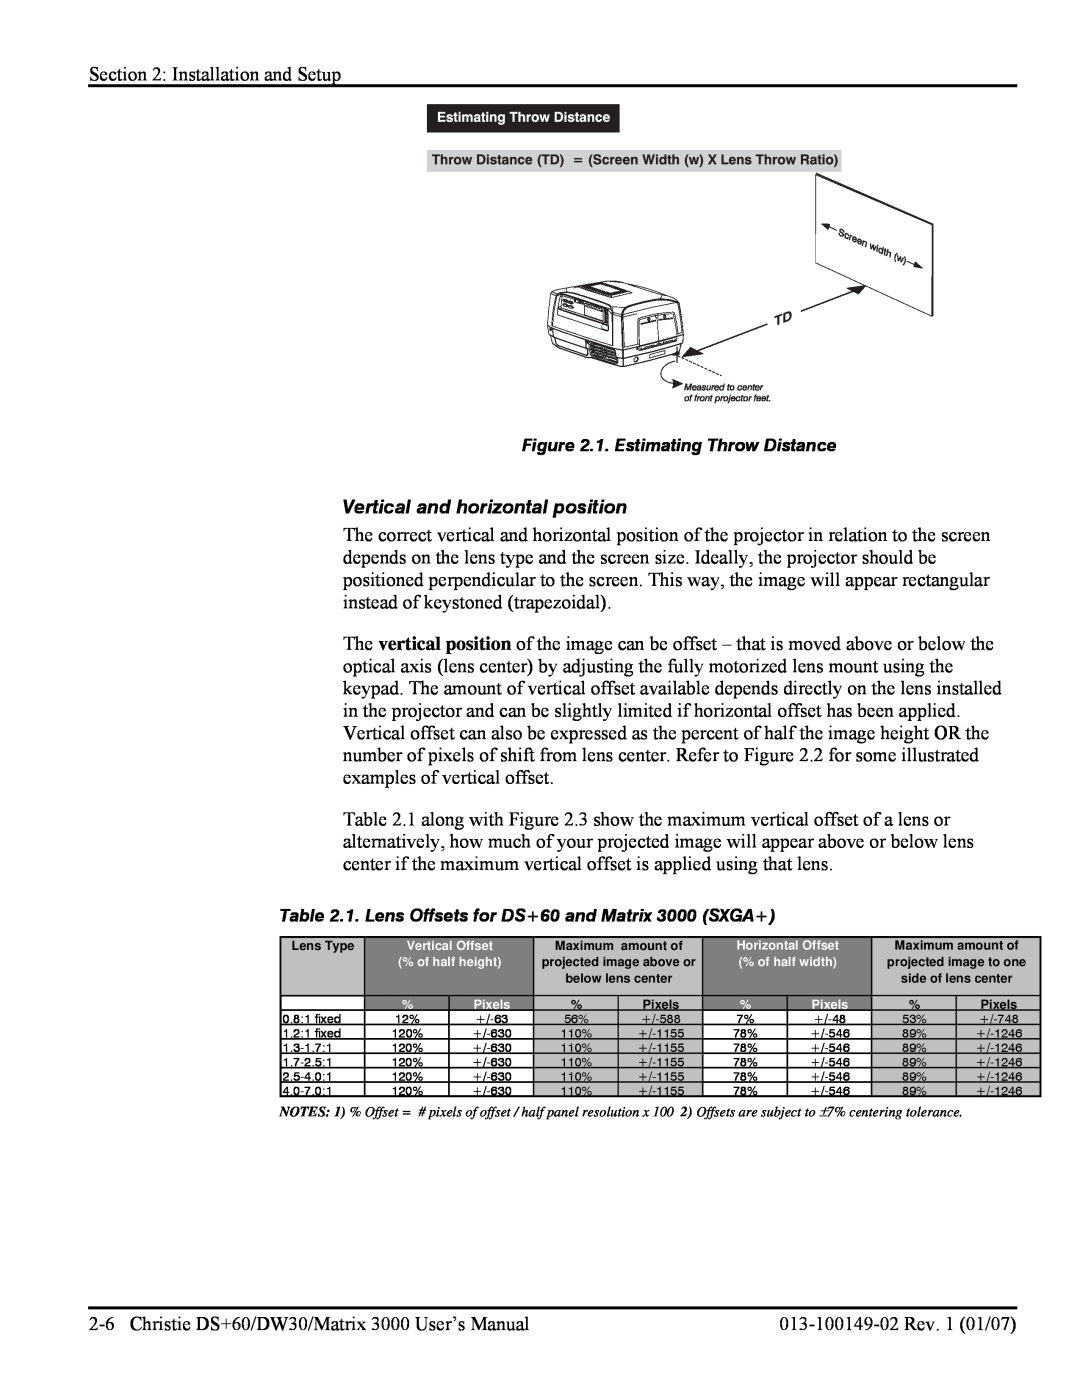 Texas Instruments DW30, MATRIX 3000 user manual Vertical and horizontal position, 1. Estimating Throw Distance 